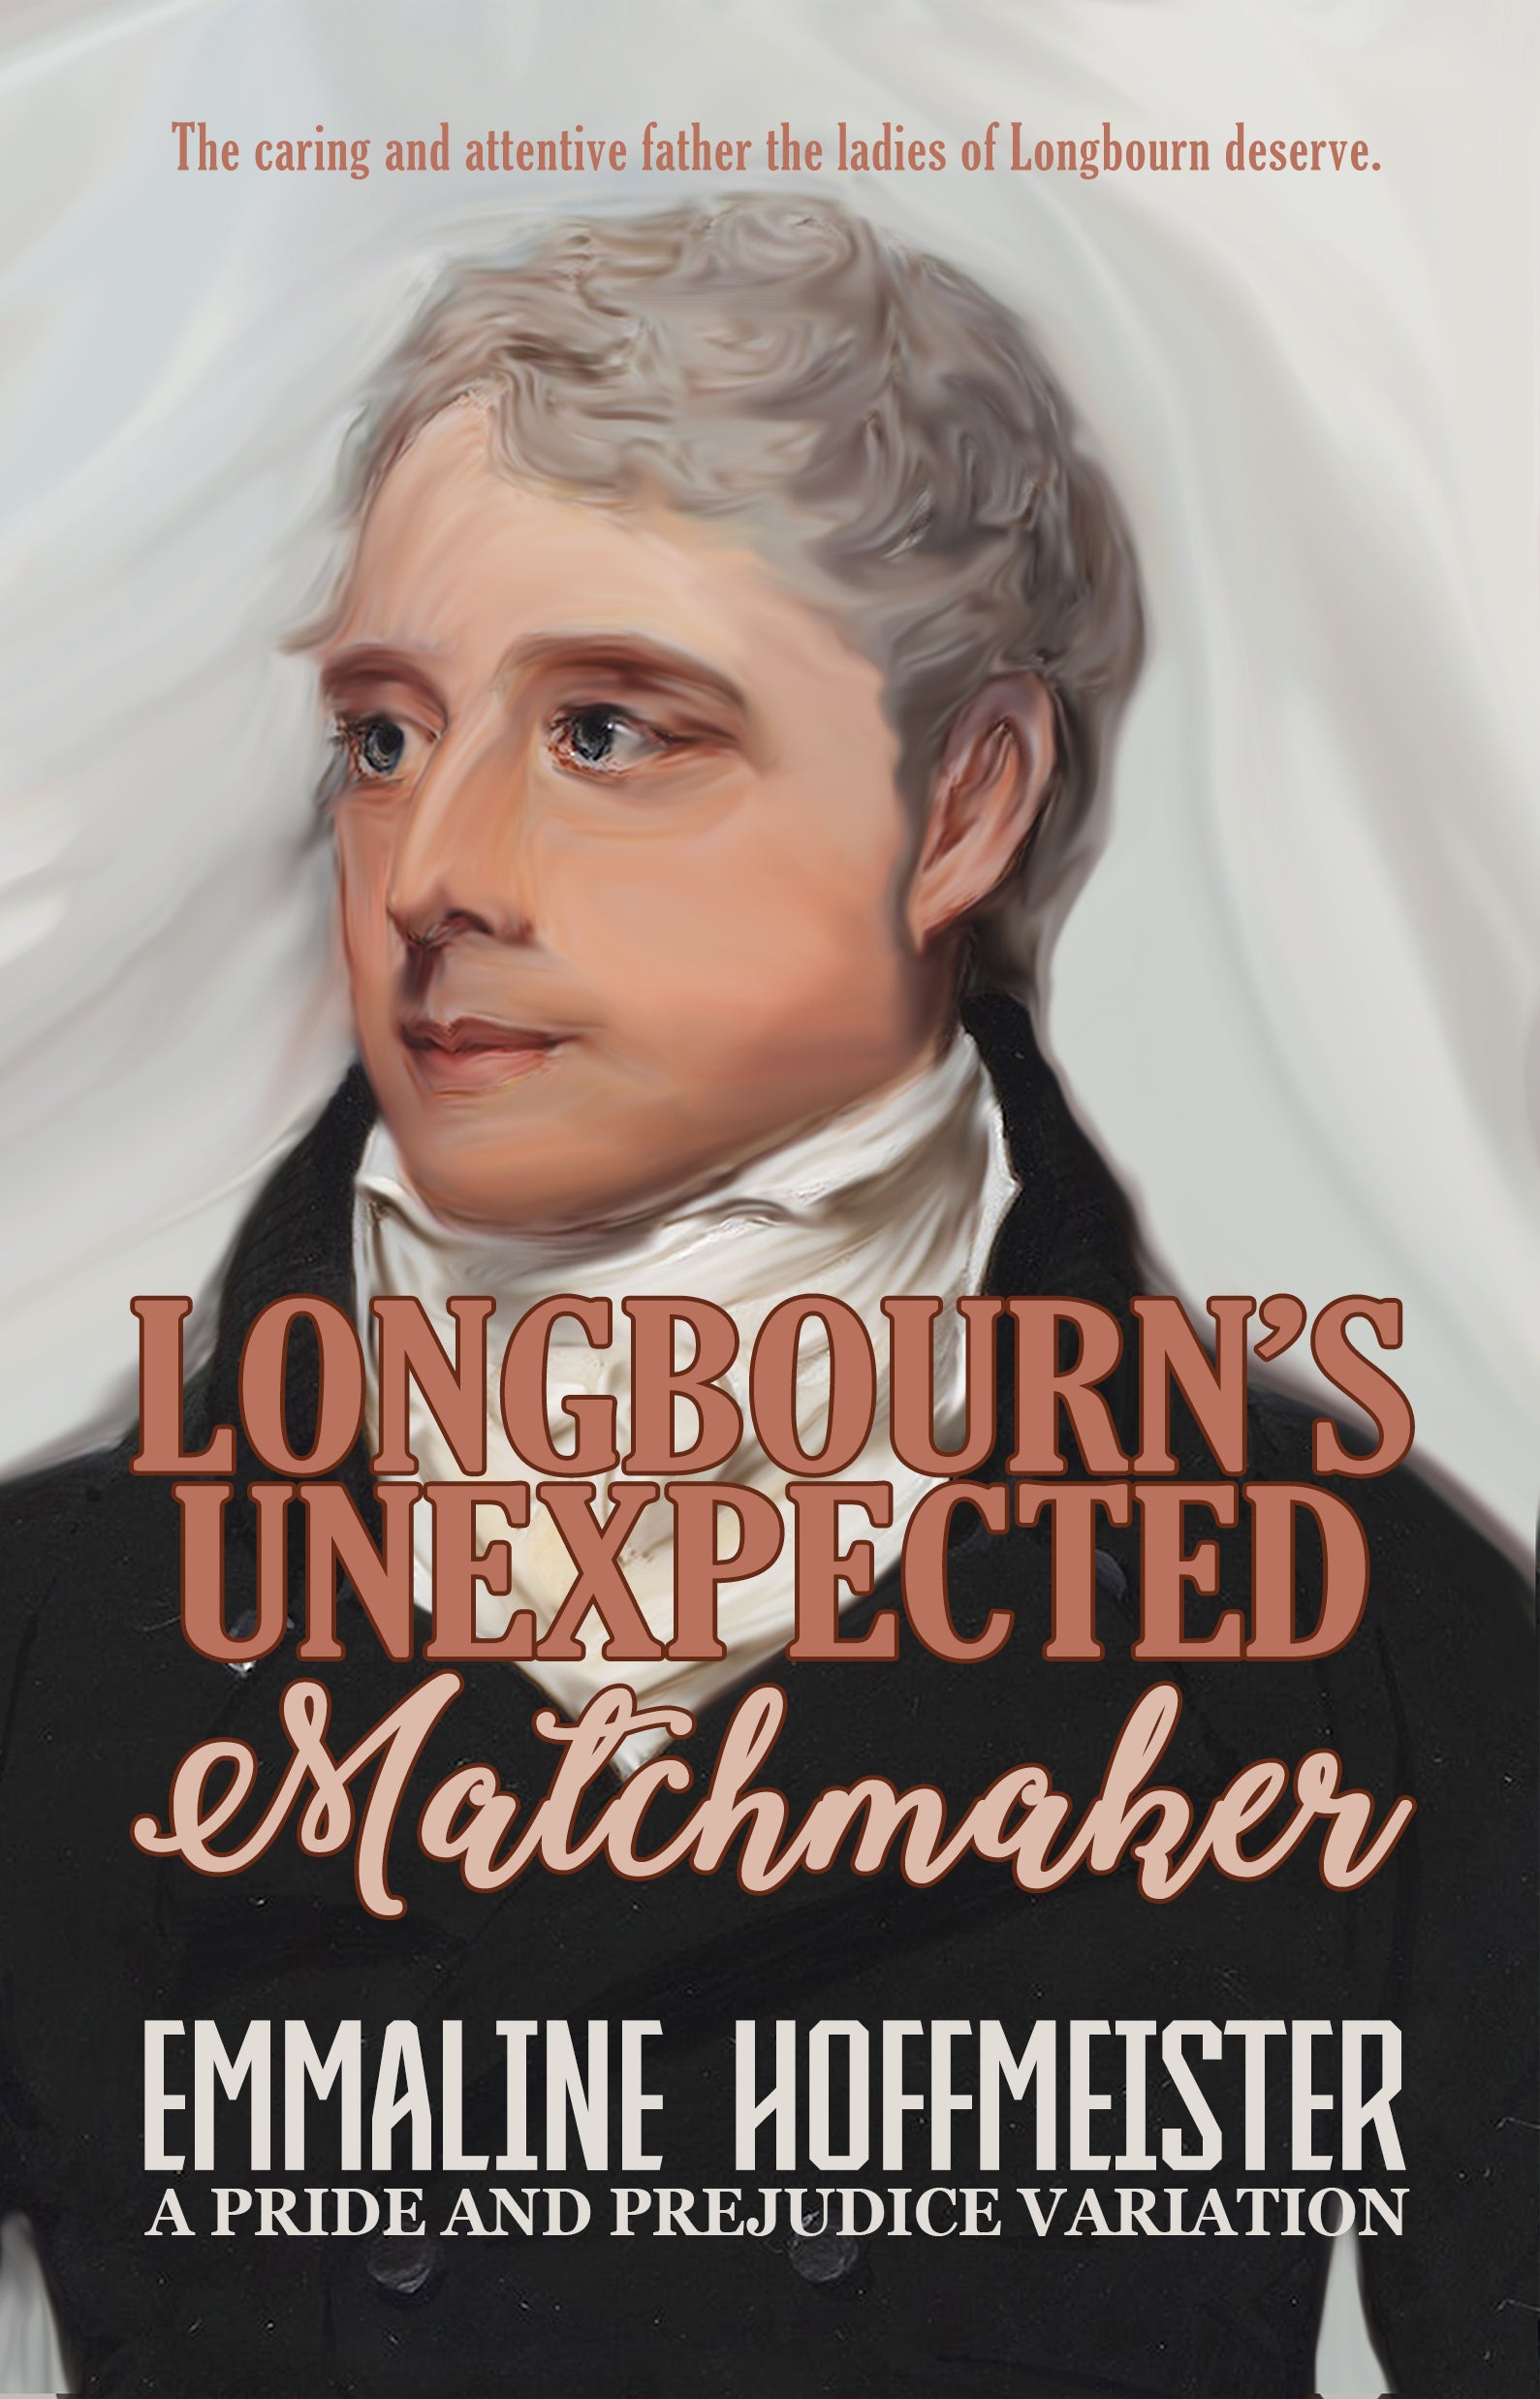 Longbourn'e Unexpected Matchmaker, A Pride and Prejudice Variation by Emmaline Hoffmeister Book Cover